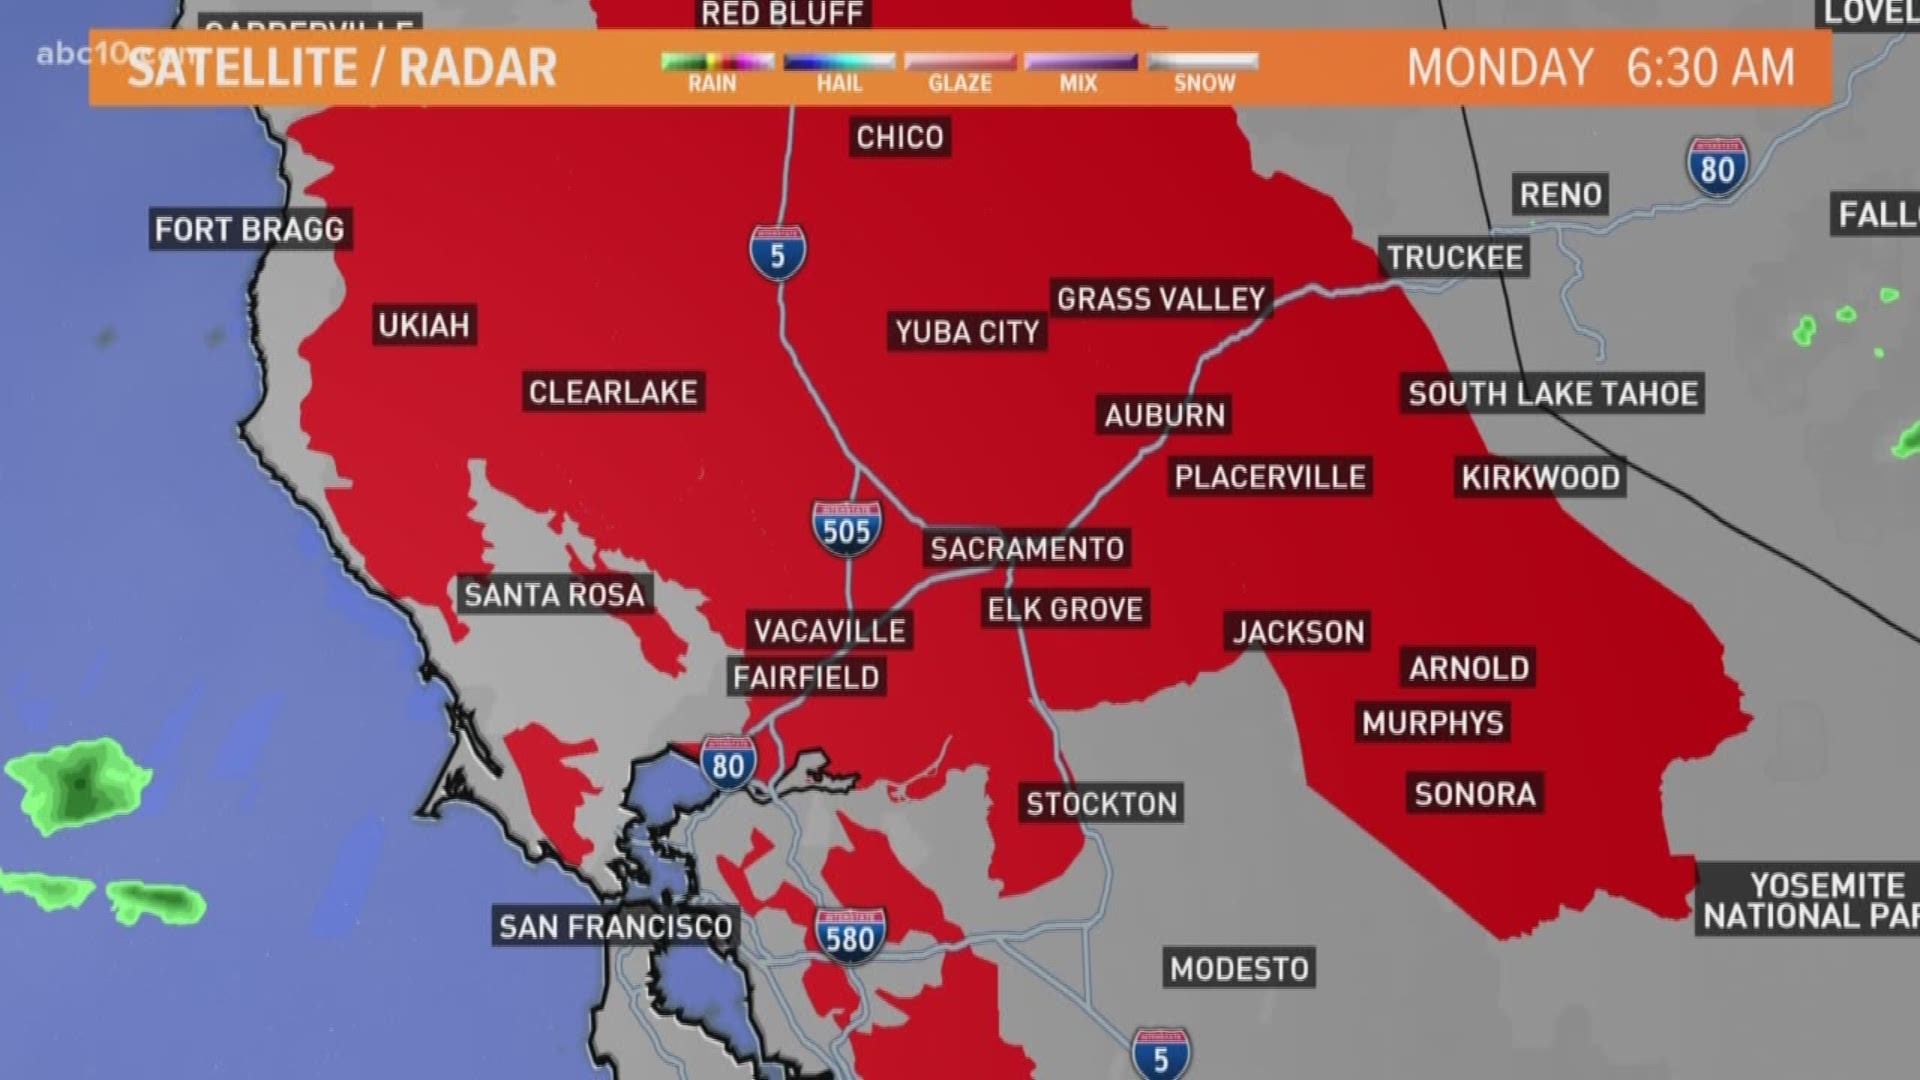 The National Weather Service has issued a Red Flag Warning for critical fire conditions for a large area of Northern California.